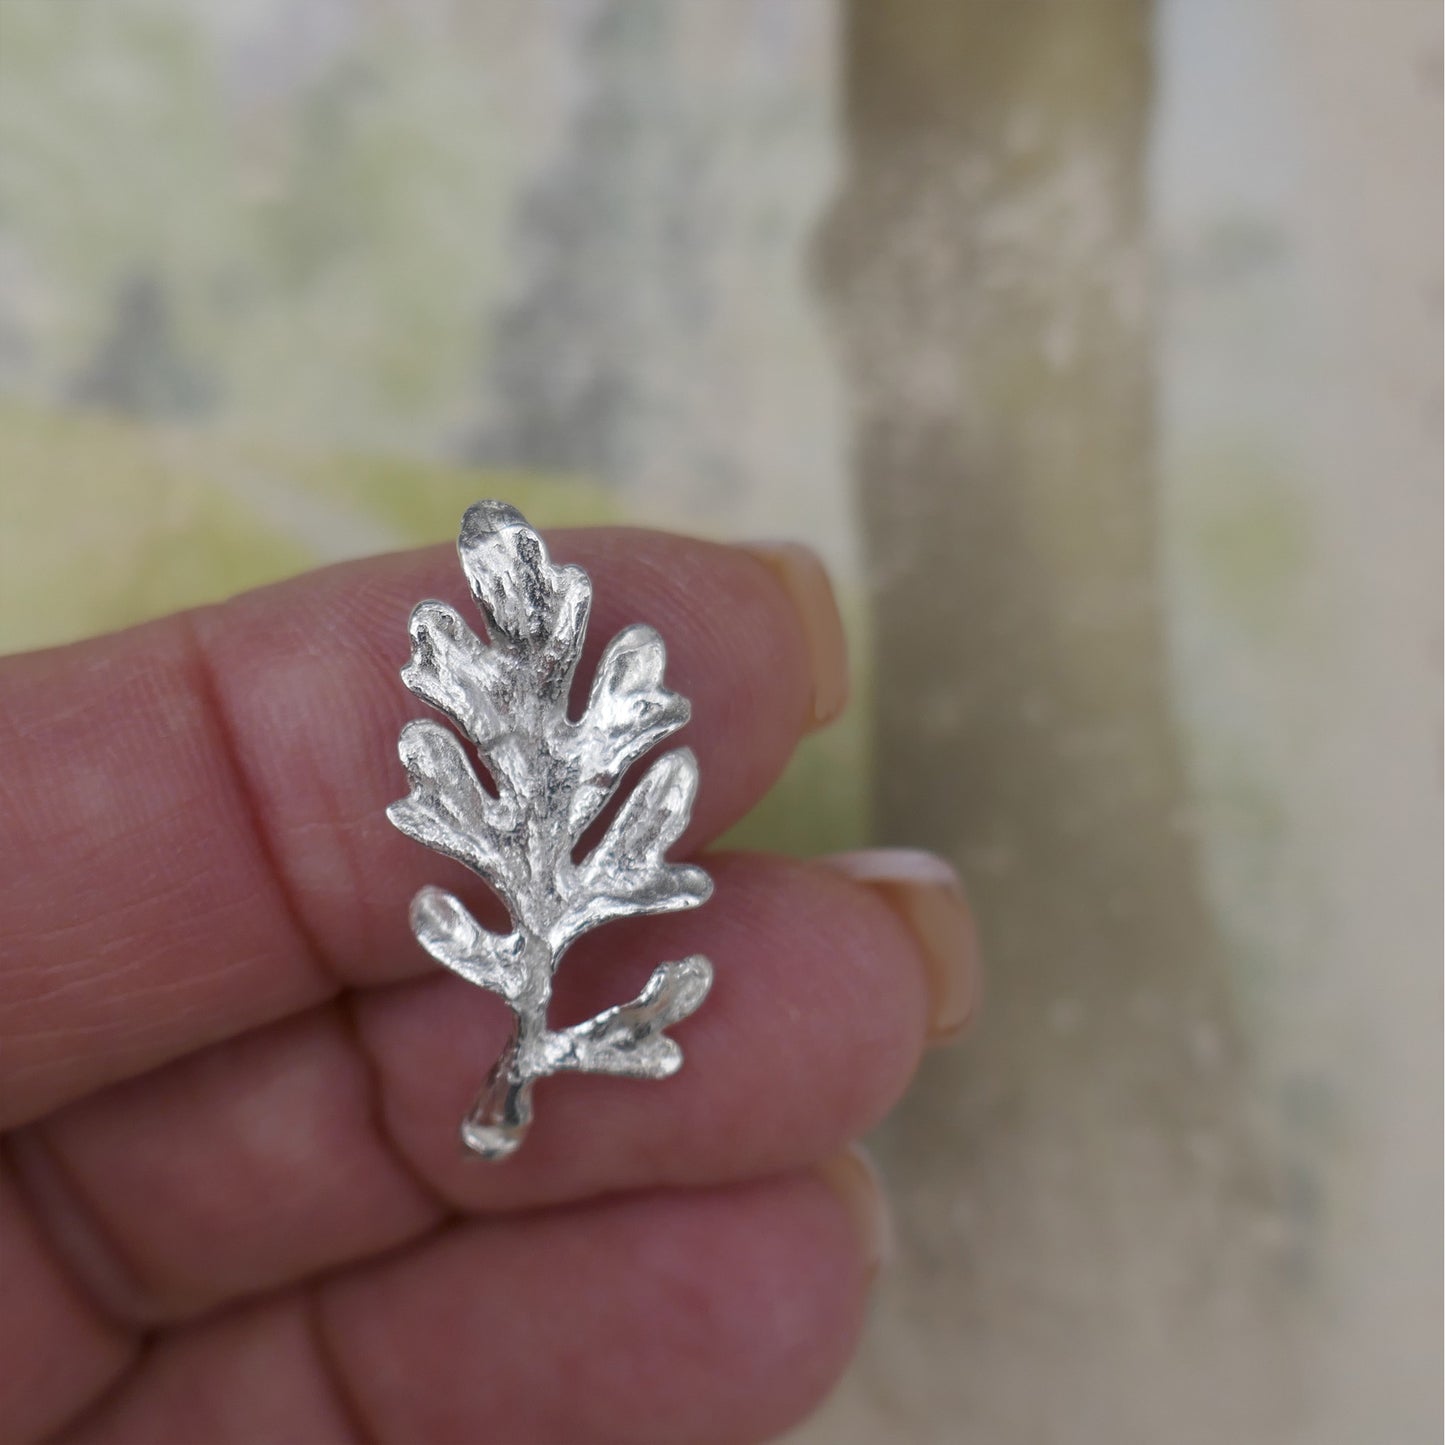 Cast Succulent Leaf for Jewelry Design - Clearance